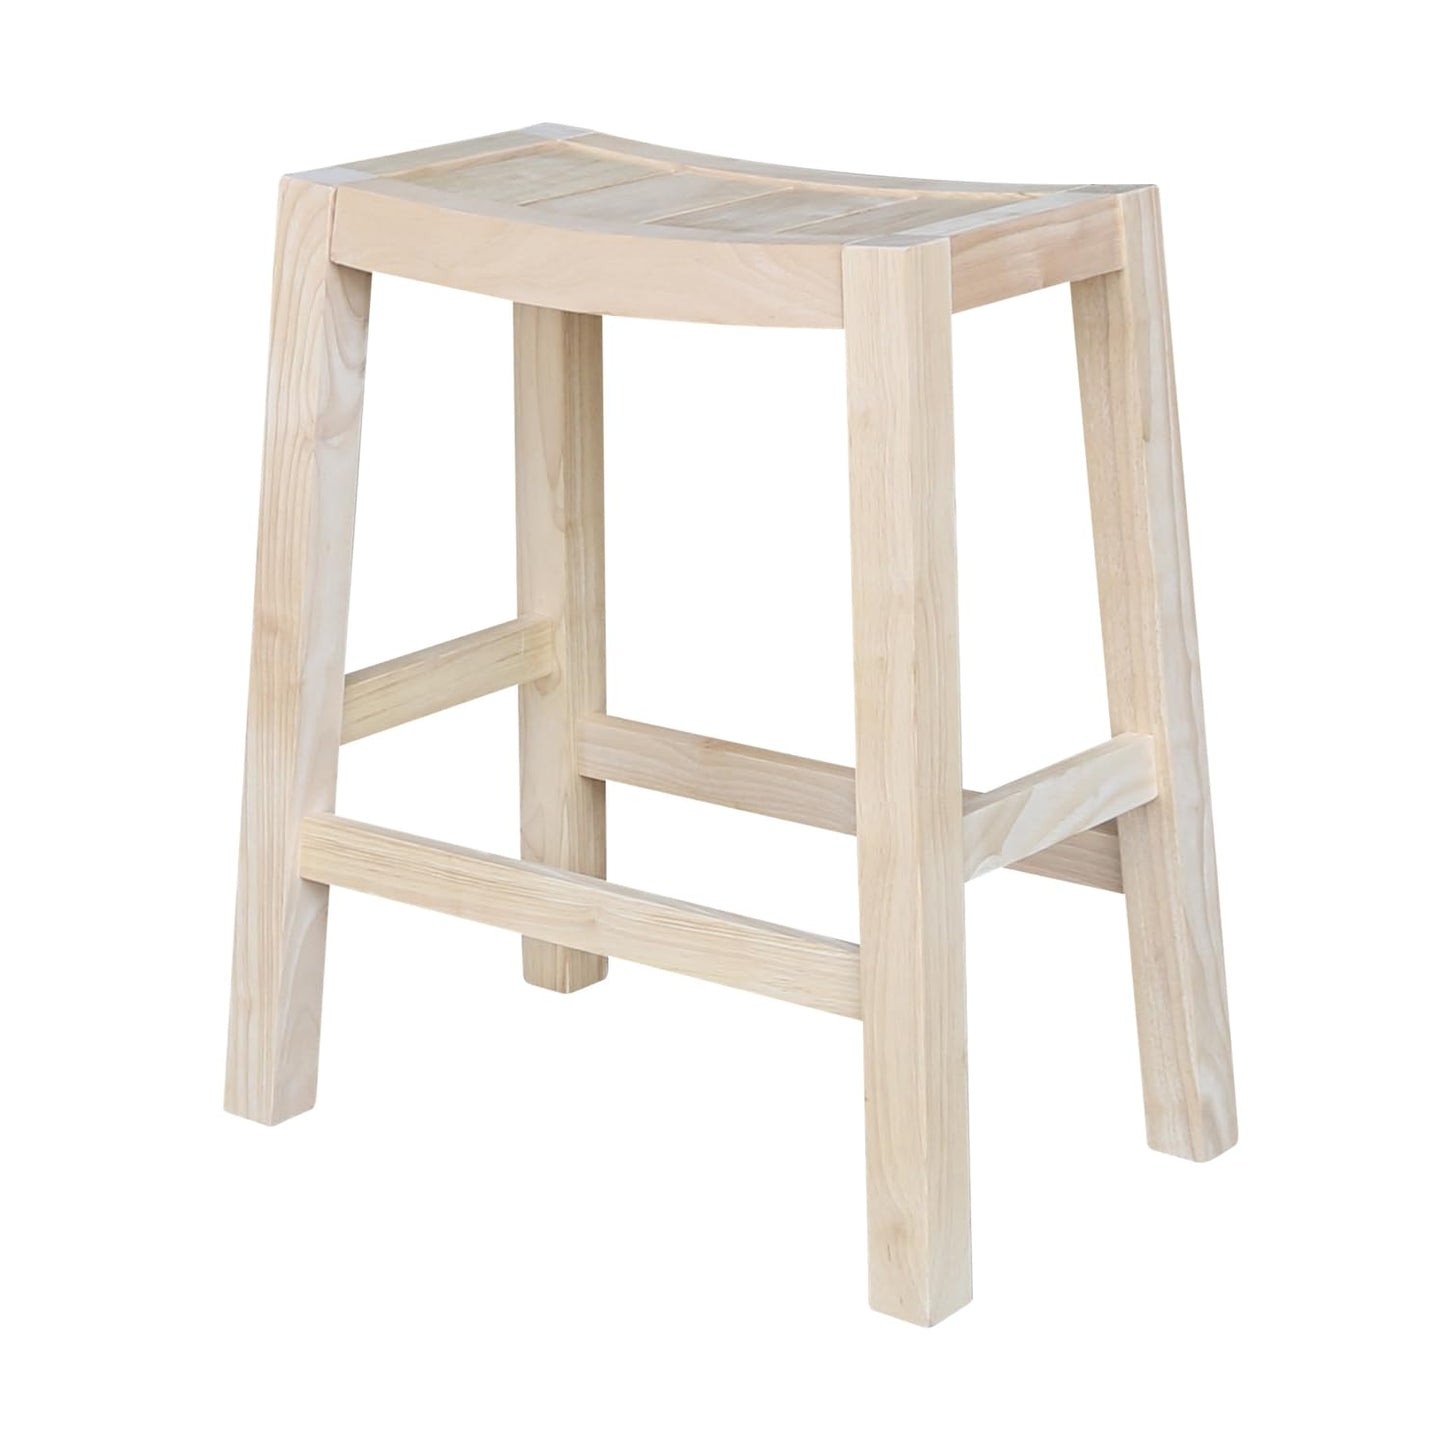 IC International Concepts International Concepts Ranch, 24-Inch, Ready to Finish Stool, Unfinished